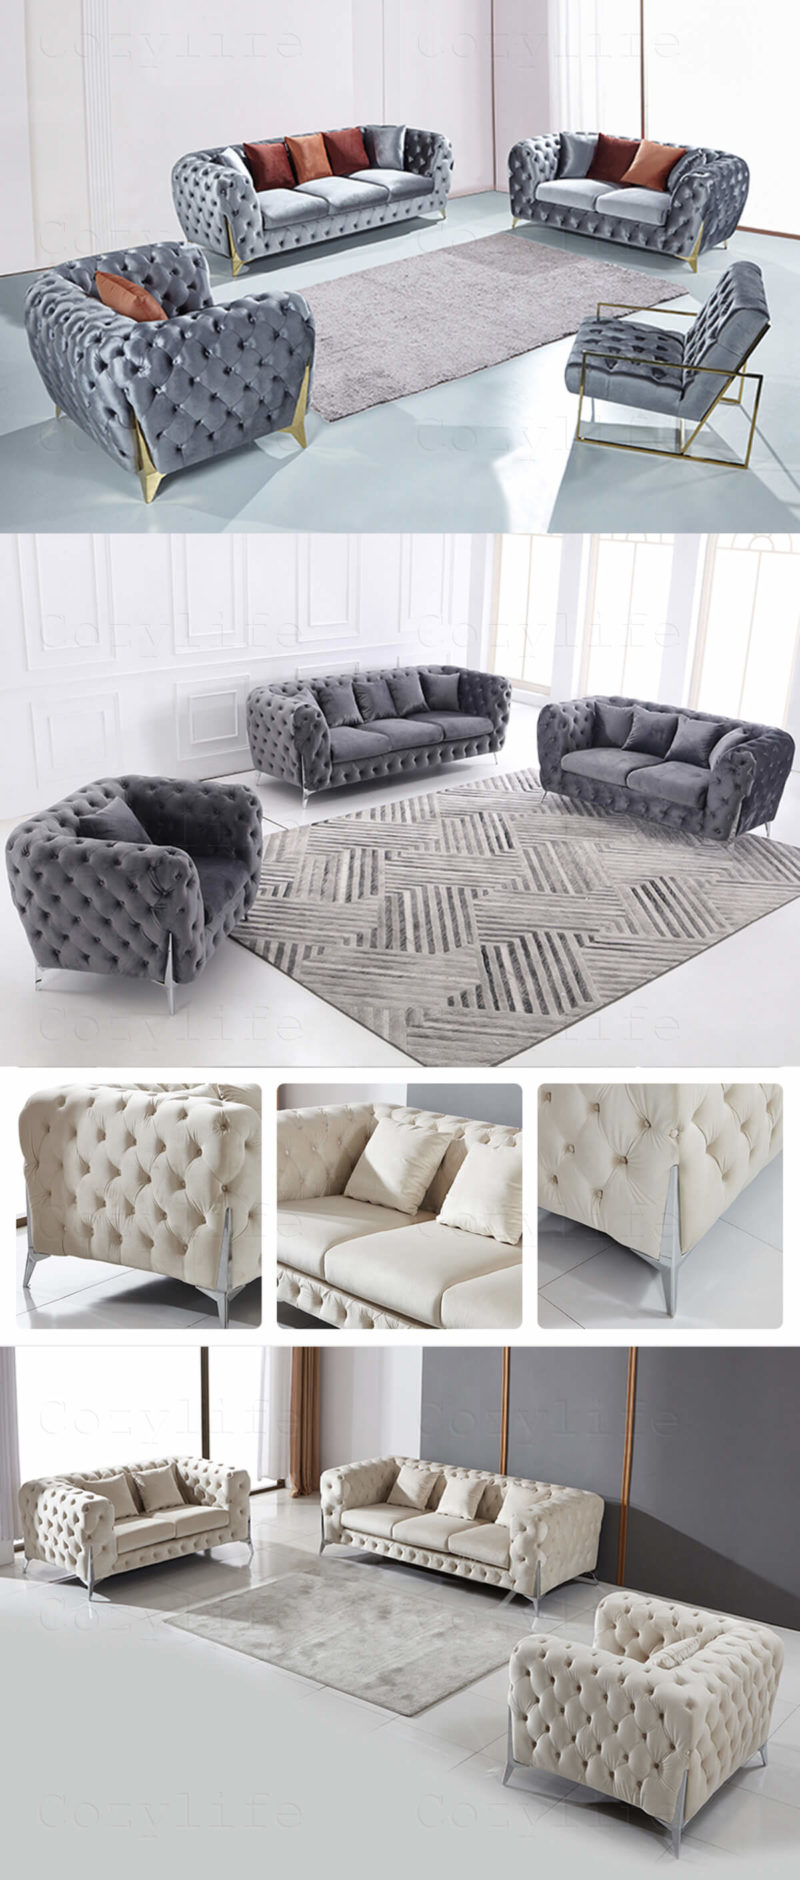 3 pieces modern chesterfield sofa with metal legs in details